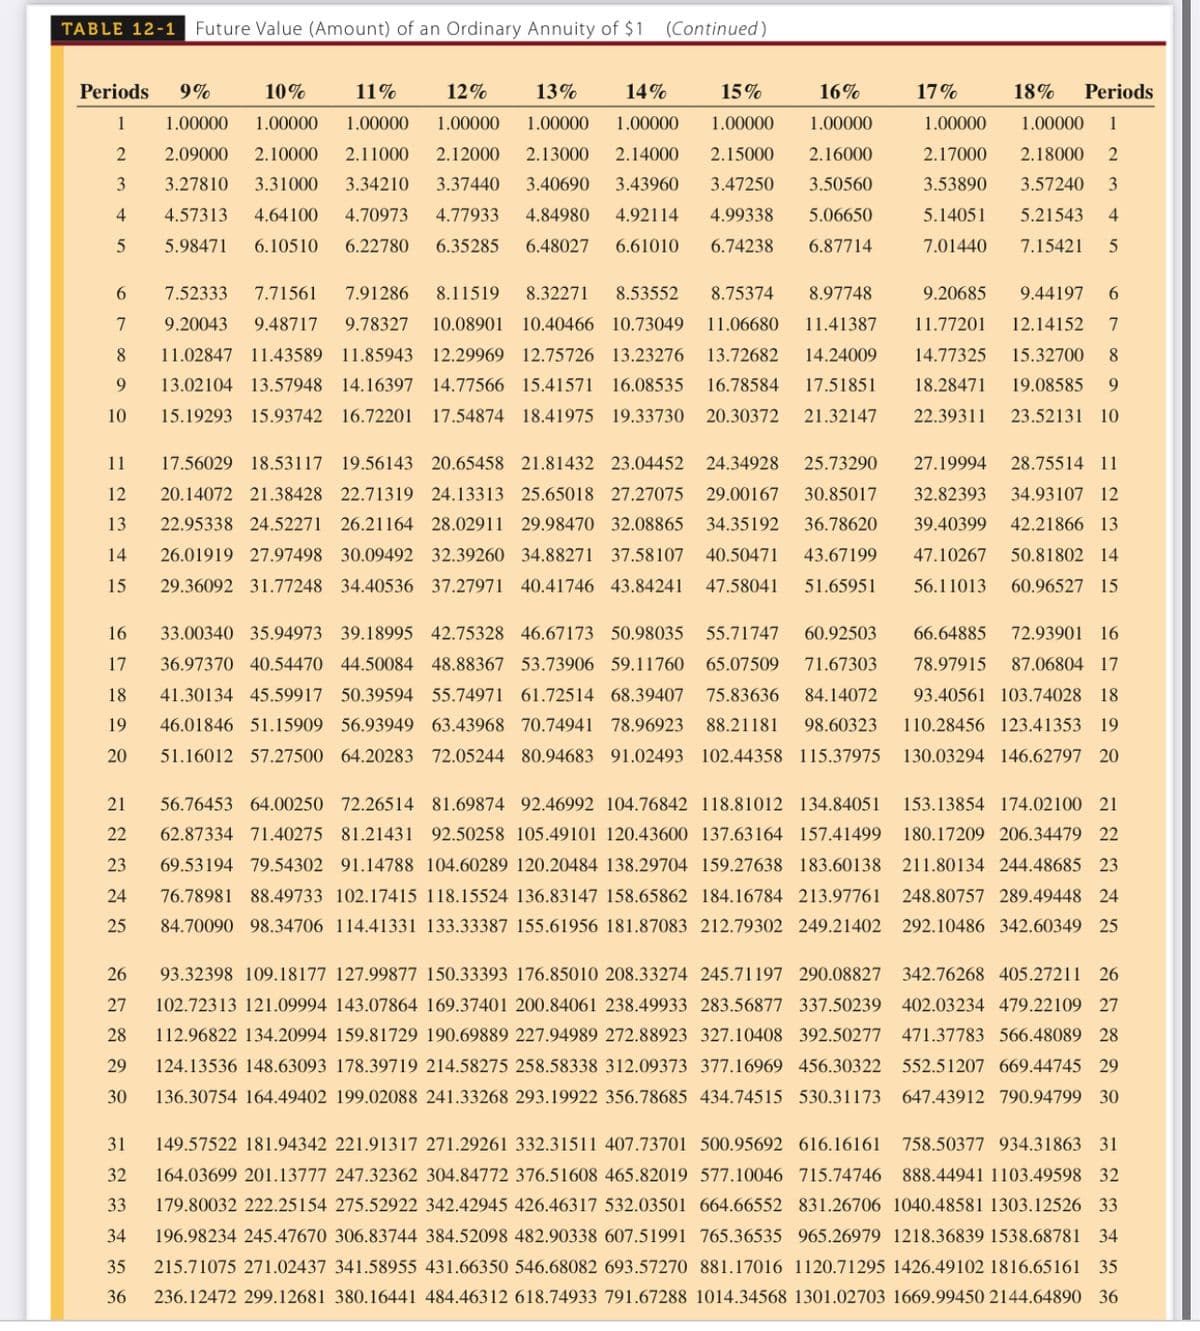 TABLE 12-1
Future Value (Amount) of an Ordinary Annuity of $1 (Continued)
Periods
9%
10%
11%
12%
13%
14%
15%
16%
17%
18%
Periods
1
1.00000
1.00000
1.00000
1.00000
1.00000
1.00000
1.00000
1.00000
1.00000
1.00000
1
2
2.09000
2.10000
2.11000
2.12000
2.13000
2.14000
2.15000
2.16000
2.17000
2.18000
2
3
3.27810
3.31000
3.34210
3.37440
3.40690
3.43960
3.47250
3.50560
3.53890
3.57240
3
4.57313
4.64100
4.70973
4.77933
4.84980
4.92114
4.99338
5.06650
5.14051
5.21543
4
5.98471
6.10510
6.22780
6.35285
6.48027
6.61010
6.74238
6.87714
7.01440
7.15421
5
7.52333
7.71561
7.91286
8.11519
8.32271
8.53552
8.75374
8.97748
9.20685
9.44197
6.
7
9.20043
9.48717
9.78327
10.08901
10.40466 10.73049
11.06680
11.41387
11.77201
12.14152
7
8.
11.02847 11.43589 11.85943 12.29969 12.75726 13.23276
13.72682
14.24009
14.77325
15.32700
8
13.02104 13.57948 14.16397 14.77566 15.41571
16.08535
16.78584
17.51851
18.28471
19.08585
9.
10
15.19293 15.93742 16.72201
17.54874 18.41975 19.33730
20.30372
21.32147
22.39311
23.52131 10
11
17.56029 18.53117 19.56143 20.65458 21.81432 23.04452
24.34928
25.73290
27.19994
28.75514 11
12
20.14072 21.38428 22.71319 24.13313 25.65018 27.27075 29.00167
30.85017
32.82393
34.93107 12
13
22.95338 24.52271 26.21164 28.02911 29.98470 32.08865
34.35192
36.78620
39.40399
42.21866 13
14
26.01919 27.97498 30.09492 32.39260 34.88271 37.58107
40.50471
43.67199
47.10267
50.81802 14
15
29.36092 31.77248 34.40536 37.27971 40.41746 43.84241
47.58041
51.65951
56.11013
60.96527 15
16
33.00340 35.94973 39.18995 42.75328 46.67173 50.98035
55.71747
60.92503
66.64885
72.93901 16
17
36.97370 40.54470 44.50084 48.88367 53.73906 59.11760 65.07509
71.67303
78.97915
87.06804 17
18
41.30134 45.59917 50.39594 55.74971 61.72514 68.39407
75.83636
84.14072
93.40561 103.74028 18
19
46.01846 51.15909 56.93949 63.43968 70.74941 78.96923
88.21181
98.60323
110.28456 123.41353 19
20
51.16012 57.27500 64.20283 72.05244 80.94683 91.02493 102.44358 115.37975
130.03294 146.62797 20
21
56.76453 64.00250 72.26514 81.69874 92.46992 104.76842 118.81012 134.84051
153.13854 174.02100 21
22
62.87334 71.40275 81.21431 92.50258 105.49101 120.43600 137.63164 157.41499
180.17209 206.34479 22
23
69.53194 79.54302 91.14788 104.60289 120.20484 138.29704 159.27638 183.60138 211.80134 244.48685 23
24
76.78981 88.49733 102.17415 118.15524 136.83147 158.65862 184.16784 213.97761
248.80757 289.49448 24
25
84.70090 98.34706 114.41331 133.33387 155.61956 181.87083 212.79302 249.21402 292.10486 342.60349 25
26
93.32398 109.18177 127.99877 150.33393 176.85010 208.33274 245.71197 290.08827 342.76268 405.27211 26
27
102.72313 121.09994 143.07864 169.37401 200.84061 238.49933 283.56877 337.50239 402.03234 479.22109 27
28
112.96822 134.20994 159.81729 190.69889 227.94989 272.88923 327.10408 392.50277 471.37783 566.48089 28
29
124.13536 148.63093 178.39719 214.58275 258.58338 312.09373 377.16969 456.30322 552.51207 669.44745 29
30
136.30754 164.49402 199.02088 241.33268 293.19922 356.78685 434.74515 530.31173
647.43912 790.94799 30
31
149.57522 181.94342 221.91317 271.29261 332.31511 407.73701 500.95692 616.16161
758.50377 934.31863 31
32
164.03699 201.13777 247.32362 304.84772 376.51608 465.82019 577.10046 715.74746 888.44941 1103.49598 32
33
179.80032 222.25154 275.52922 342.42945 426.46317 532.03501 664.66552 831.26706 1040.48581 1303.12526 33
34
196.98234 245.47670 306.83744 384.52098 482.90338 607.51991 765.36535 965.26979 1218.36839 1538.68781 34
35
215.71075 271.02437 341.58955 431.66350 546.68082 693.57270 881.17016 1120.71295 1426.49102 1816.65161 35
36
236.12472 299.12681 380.16441 484.46312 618.74933 791.67288 1014.34568 1301.02703 1669.99450 2144.64890 36
